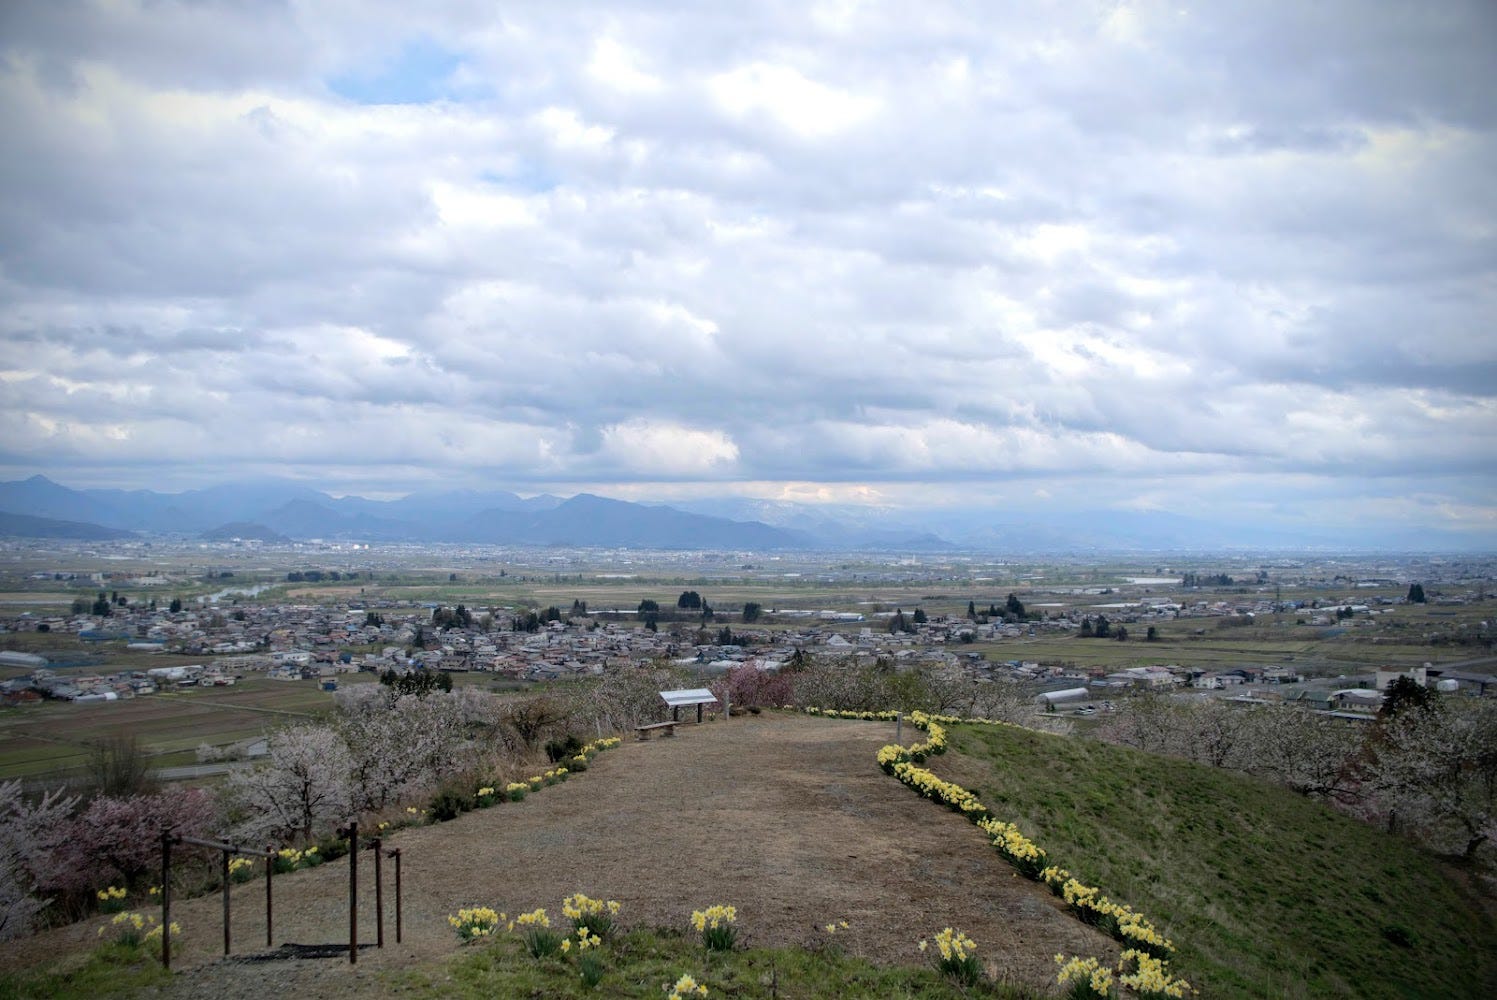 The view of Murayama City and inland Yamagata Prefecture from the Bell of Happiness at the summit of Mt. Kitayama.